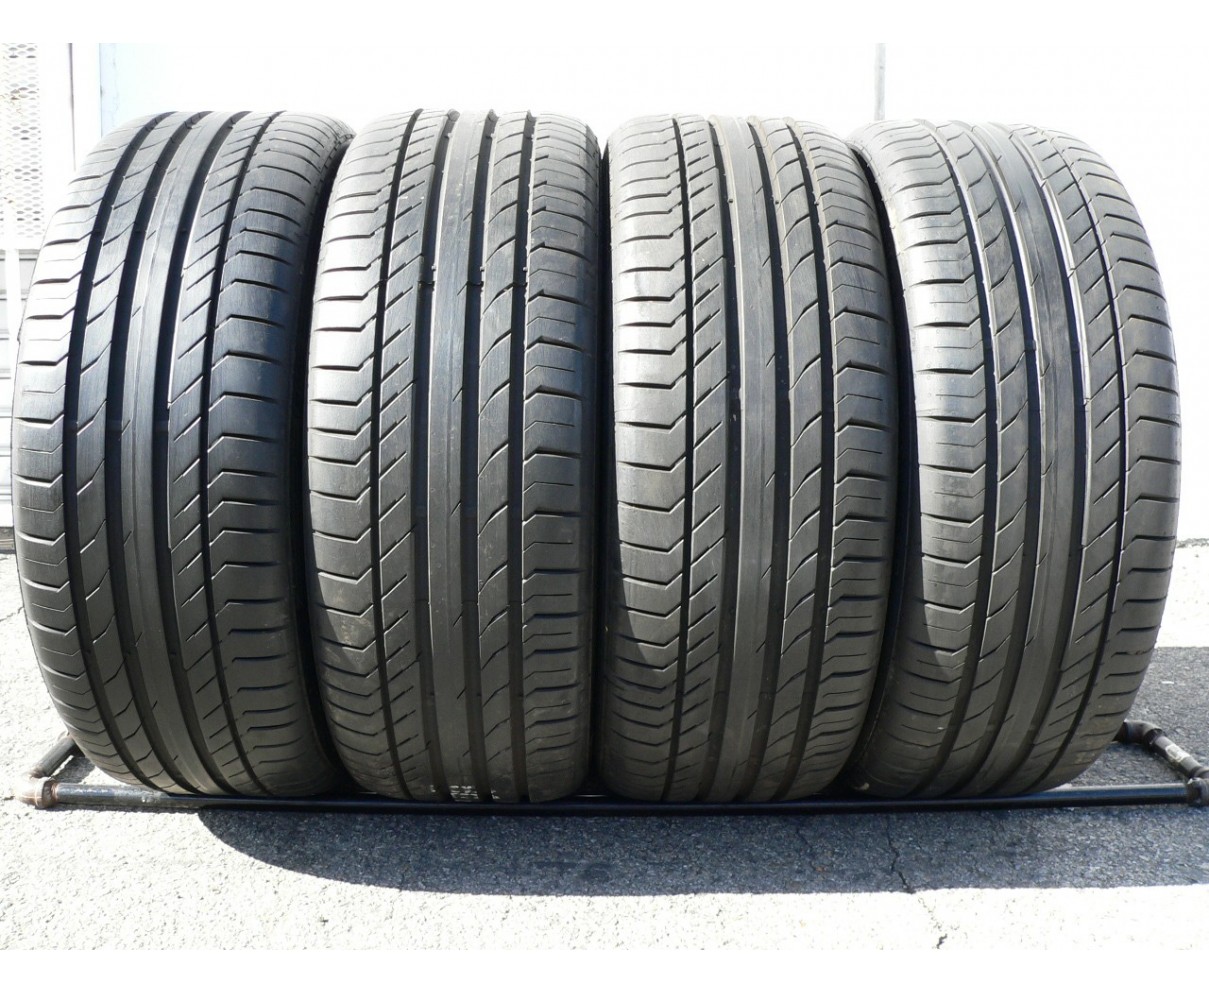 ContiSportContact 4 5 used life Flat 235 Continental tires Run 45 90% 19 95V